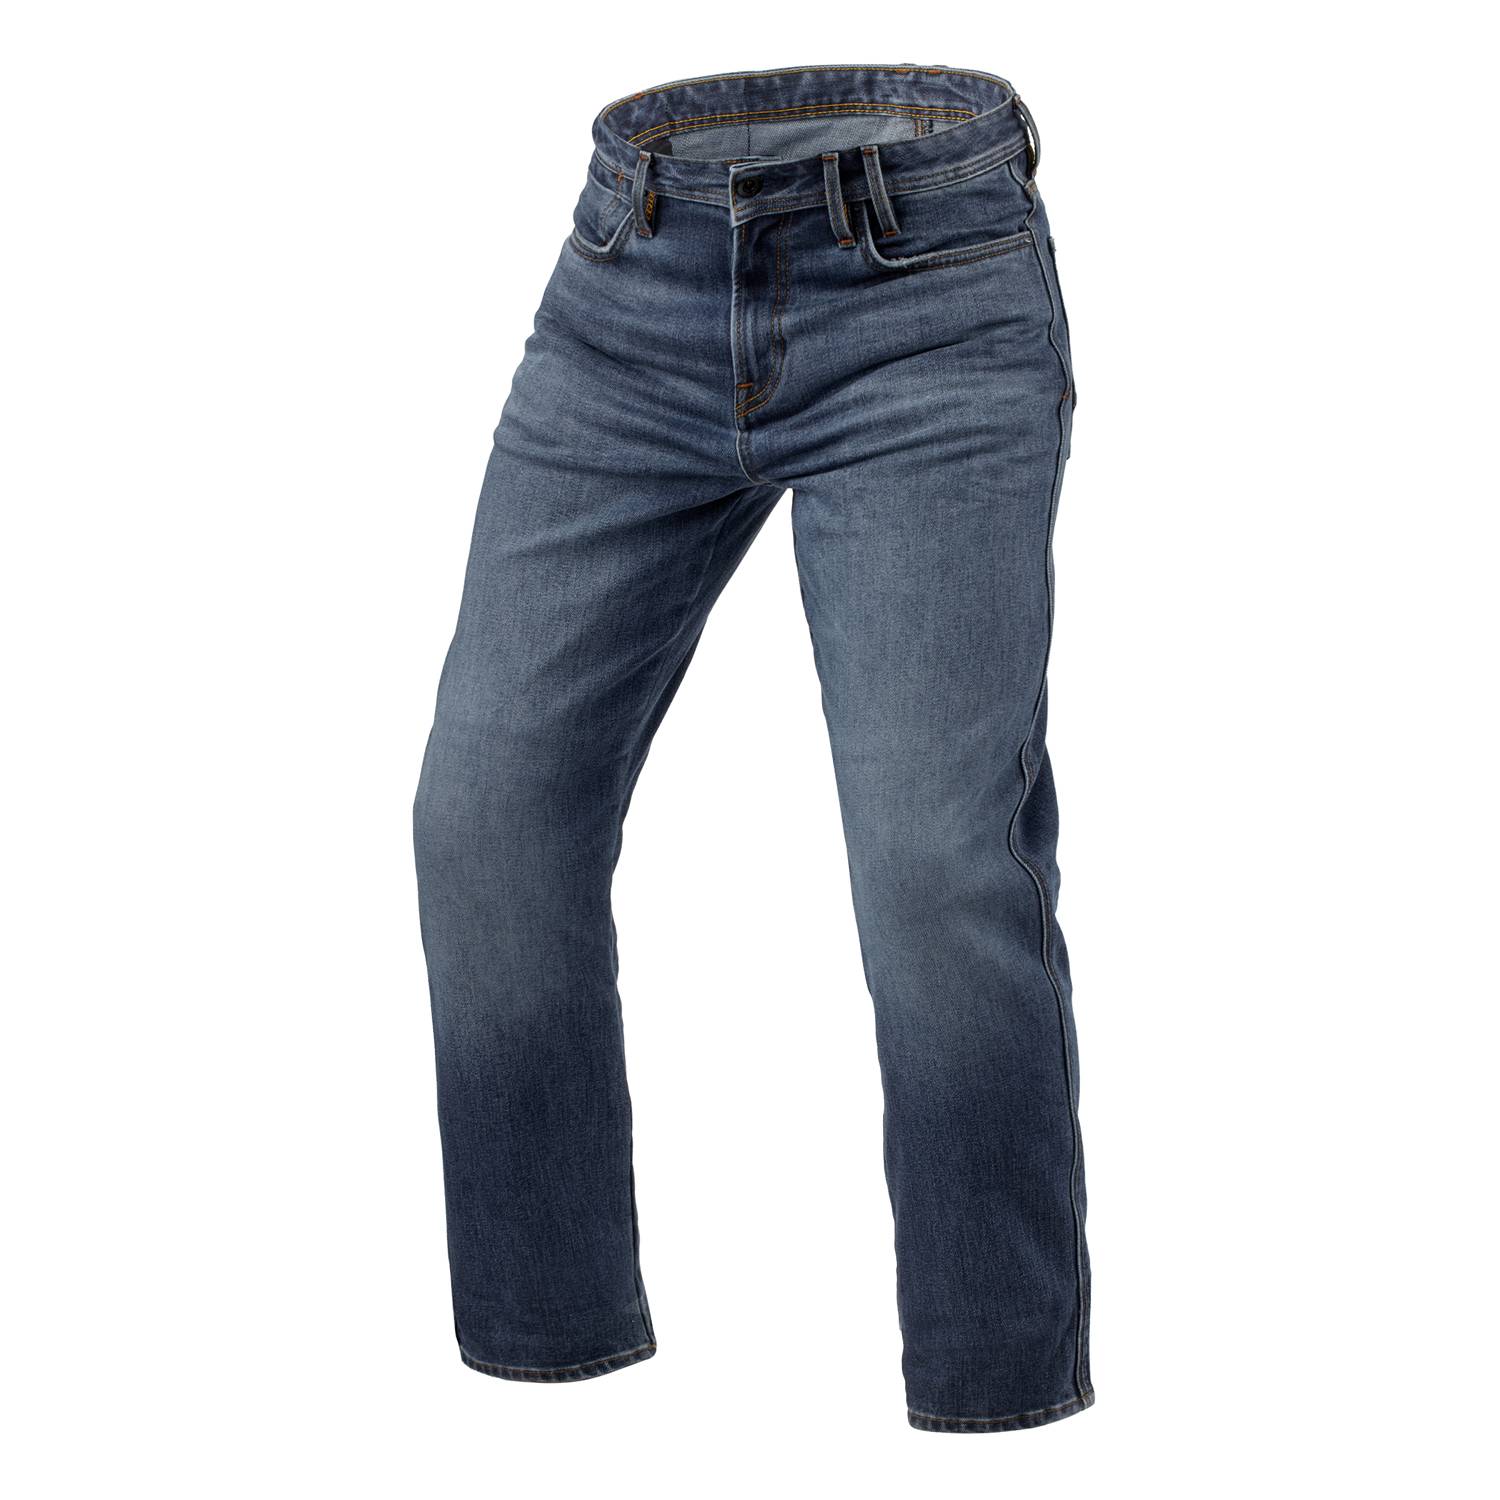 Image of EU REV'IT! Jeans Lombard 3 RF Medium Blue Stone L34 Motorcycle Jeans Taille L34/W34